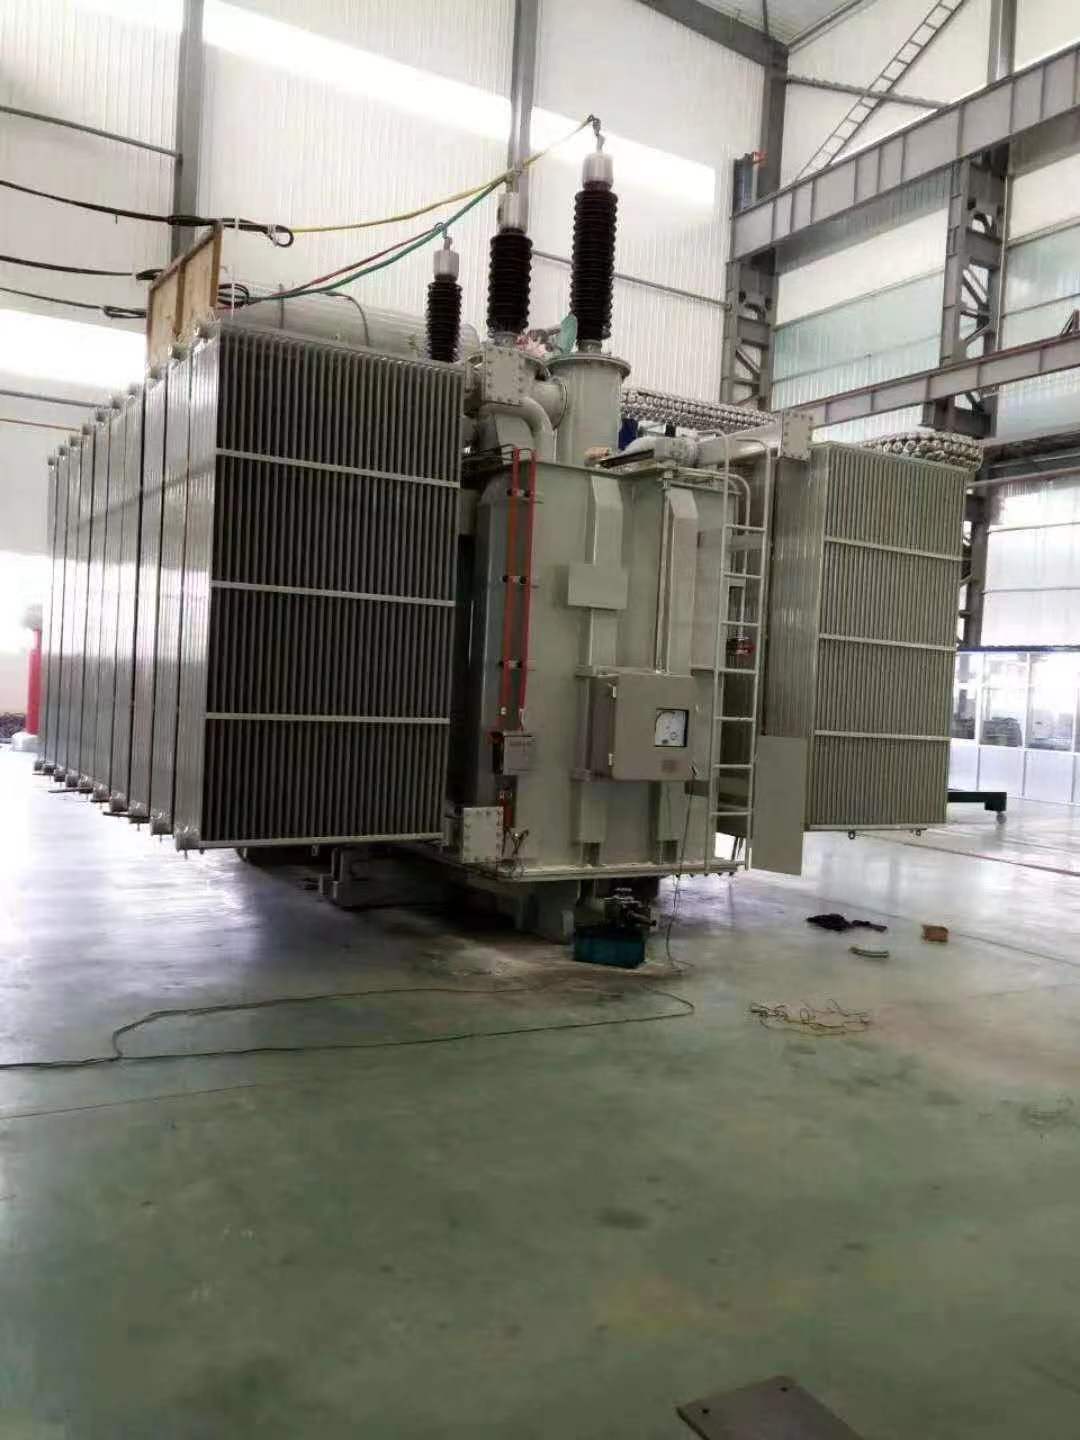 How to sell compact substations to foreign investors-SPL- power transformer,electrical transformer,Combined compact substation,Metalclad AC Enclosed Switchgear,Low Voltage Switchgear,Indoor AC Metal Clad Intermediate Switchgear,Non-encapsulated Dry-type Power Transformer,Unwrapped coil dry-type transformer,Epoxy resin cast silicon steel sheet dry-type transformer,Epoxy resin cast amorphous alloy dry-type transformer,Amorphous alloy oil-immersed power transformer,Silicon steel sheet oil-immersed power,electric transformer,Distribution Transformer,voltage transformer,step-down transformer,reducing transformer,low-loss power transformer,loss power transformer,Oil-type Transformer,Oil Distribution Transformer,Transformer-Oil-lmmersed,Oil Transformer,Oil Immersed Transformer,three phase oil immersed power transformer,oil filled electrical transformer,Sealed amorphous alloy power transformer,Dry Type Transformer,dry Transformer,Cast Resin Dry Type Transformer,dry-type transformer,resin-casting type transformer,resinated dry type transformer,CRDT,Unwrapped coil power transformer,three phase dry Transformer,articulated unit substation,AS,Modular substation,transformer substation,electric substation,Power Sub-station,Preinstalled substation,YBM,prefabricated substation,Distribution Substation,compact substation,MV power stations,LV power stations,HV power stations,Switchgear Cabinet,MV Switchgear Cabinet,LV Switchgear Cabinet,HV Switchgear Cabinet,pull-out switch cabinet,Ac metal closed ring network switchgear,Indoor metal armored central switchgear,Box-type substation,custom transformers,customized transformers,Metal enclosed electrical switchgear,LV Switchgear Cabinet,